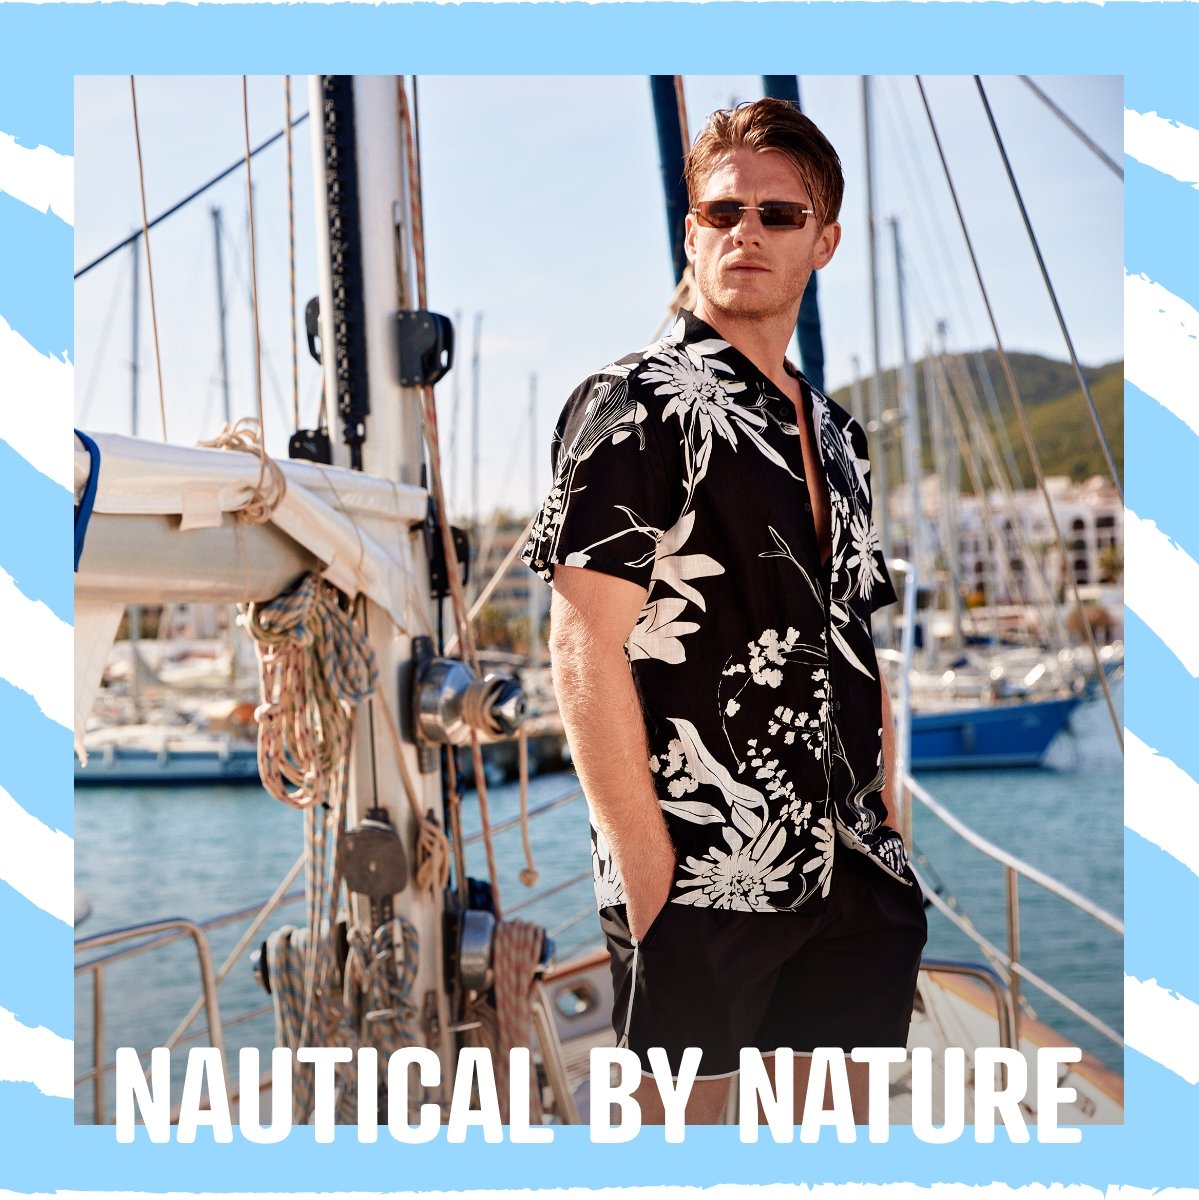 Nautical by nature